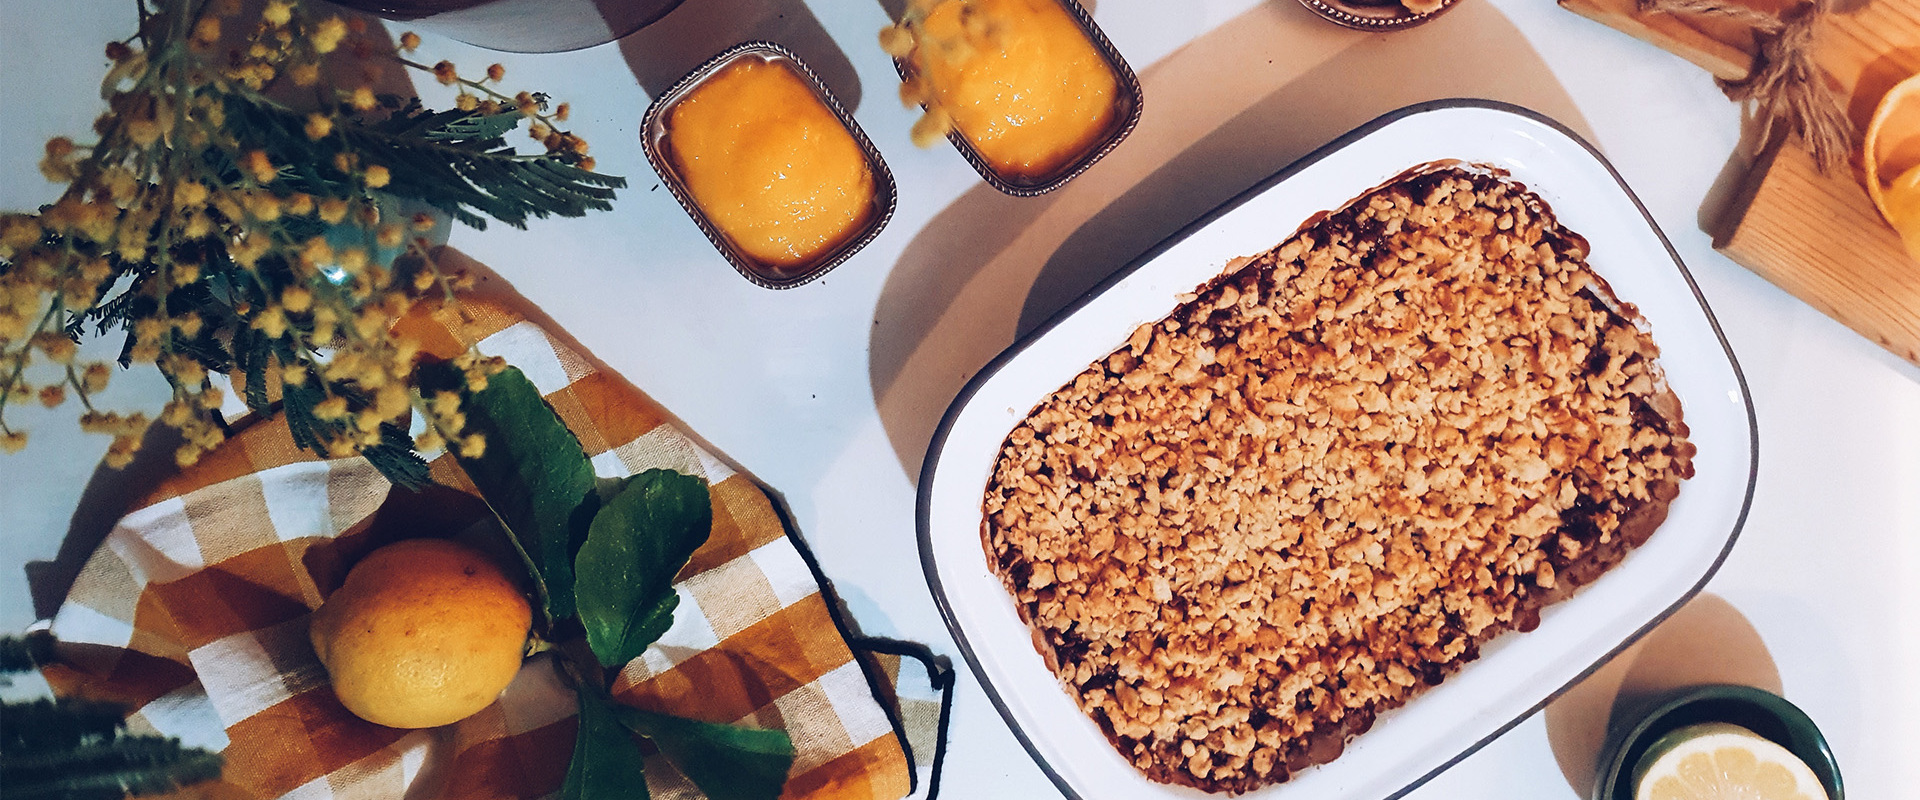 Pear and chocolate crumble - A recipe by Federica Barbaranelli
